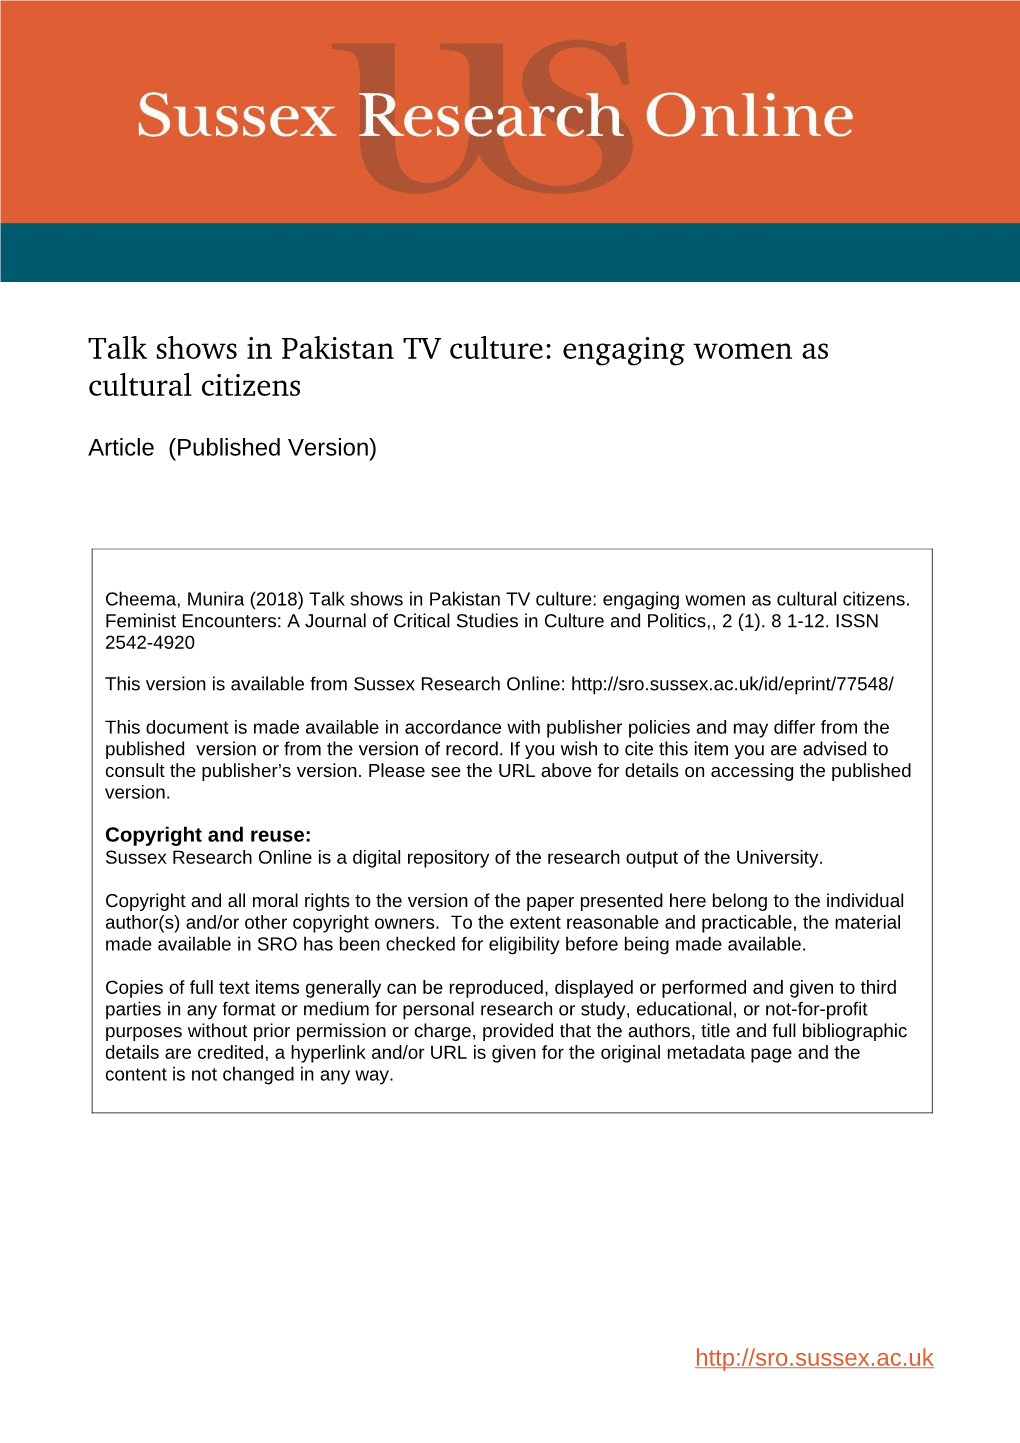 Talk Shows in Pakistan TV Culture: Engaging Women As Cultural Citizens